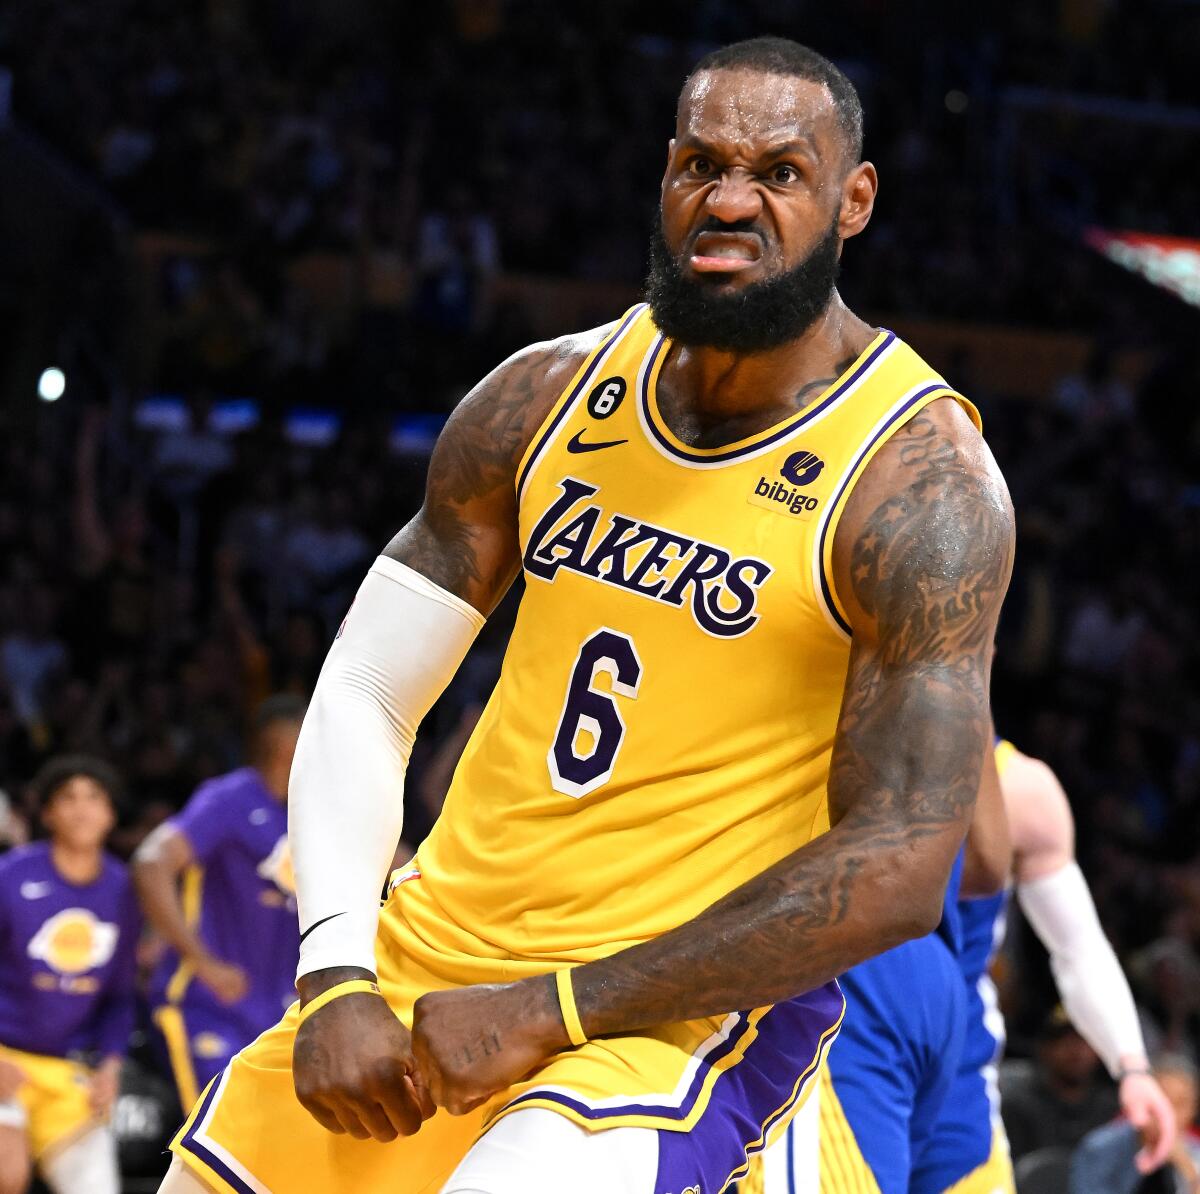 Lakers star LeBron James flexes after scoring a basket in a playoff game against the Golden State Warriors in April.